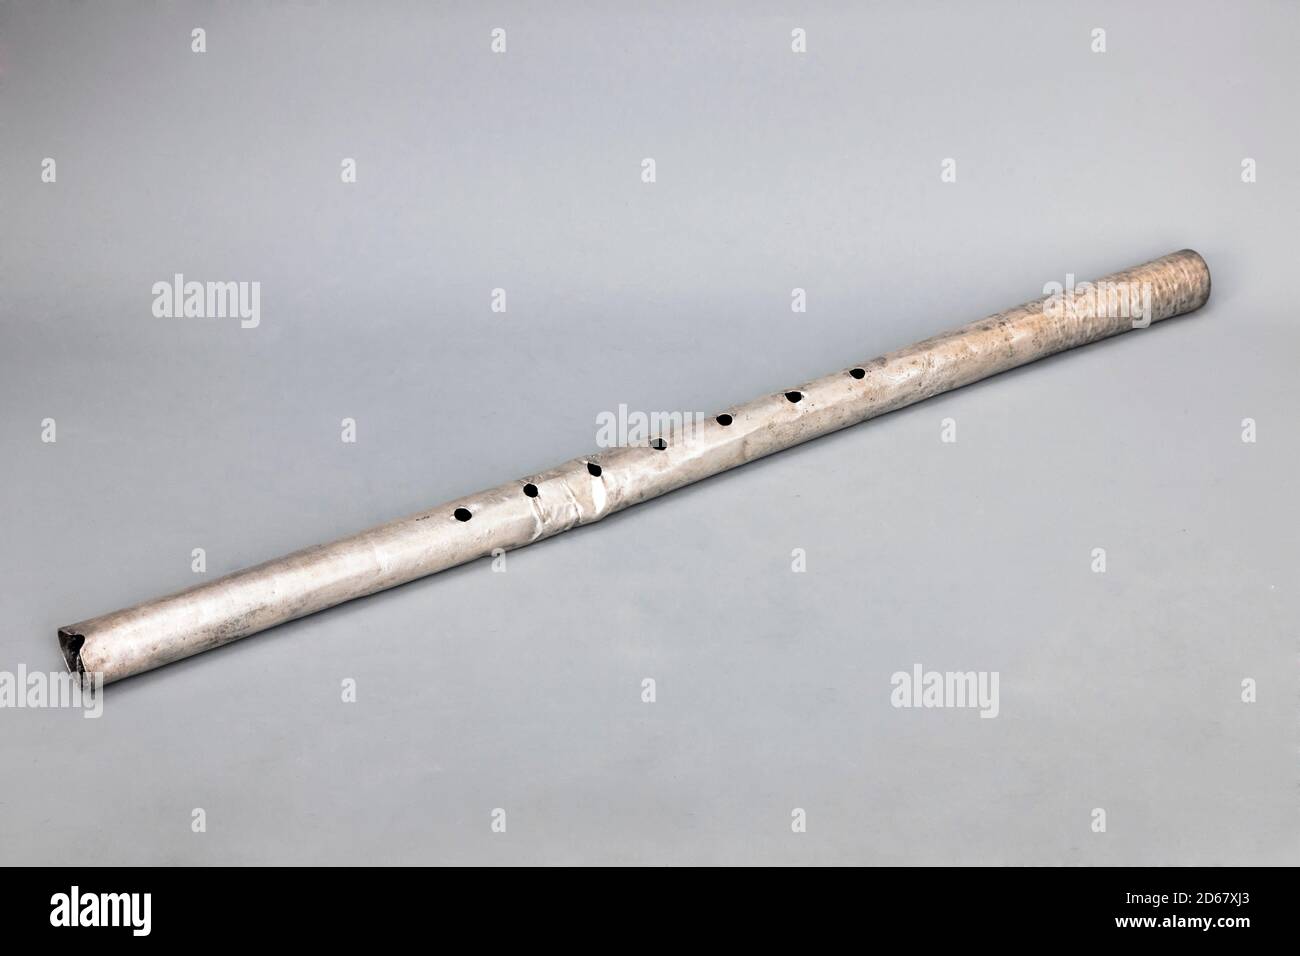 Metal Quena(flute), Chimu collection of museum warehouse, 'National Museum of Archaeology, Anthropology and History of Peru', Lima, Peru,South America Stock Photo